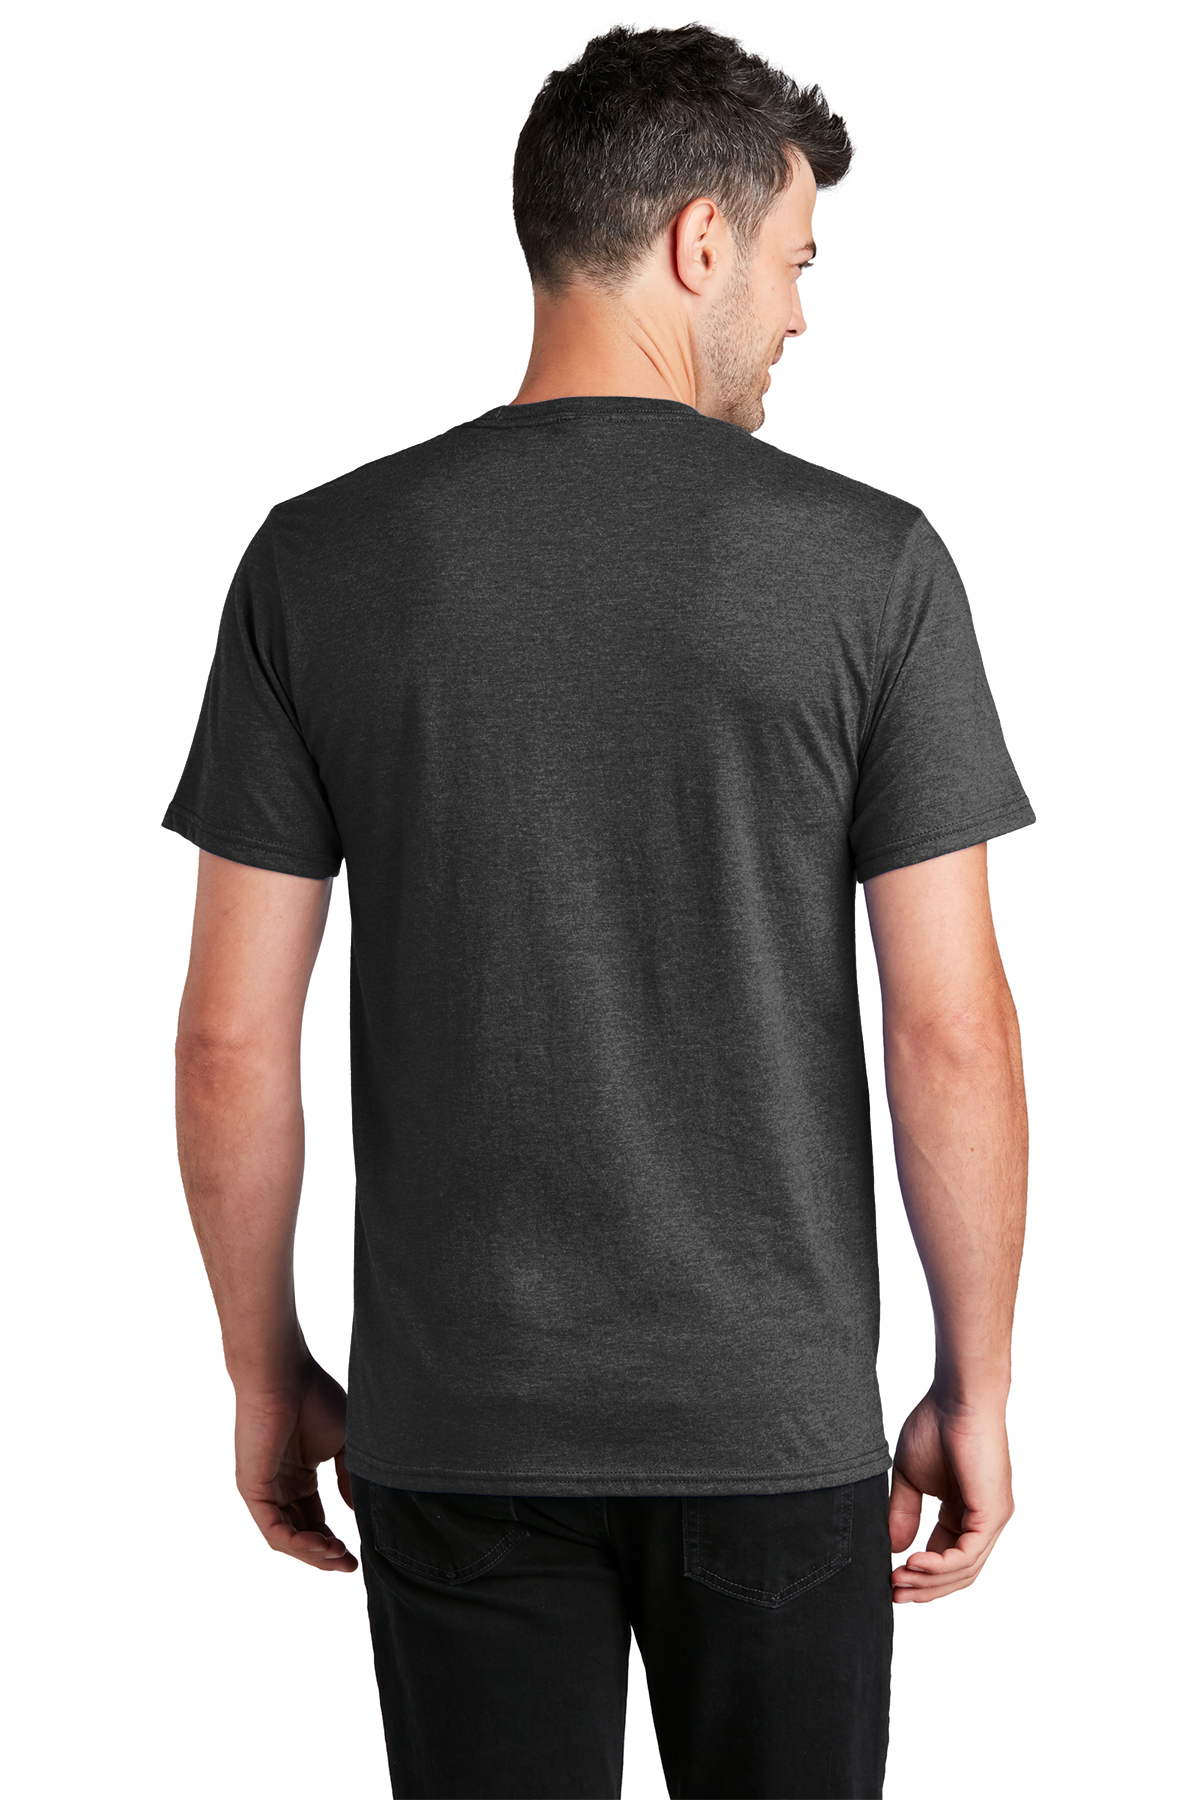 Port & Company Fan Favorite Blend Tee | Product | Company Casuals